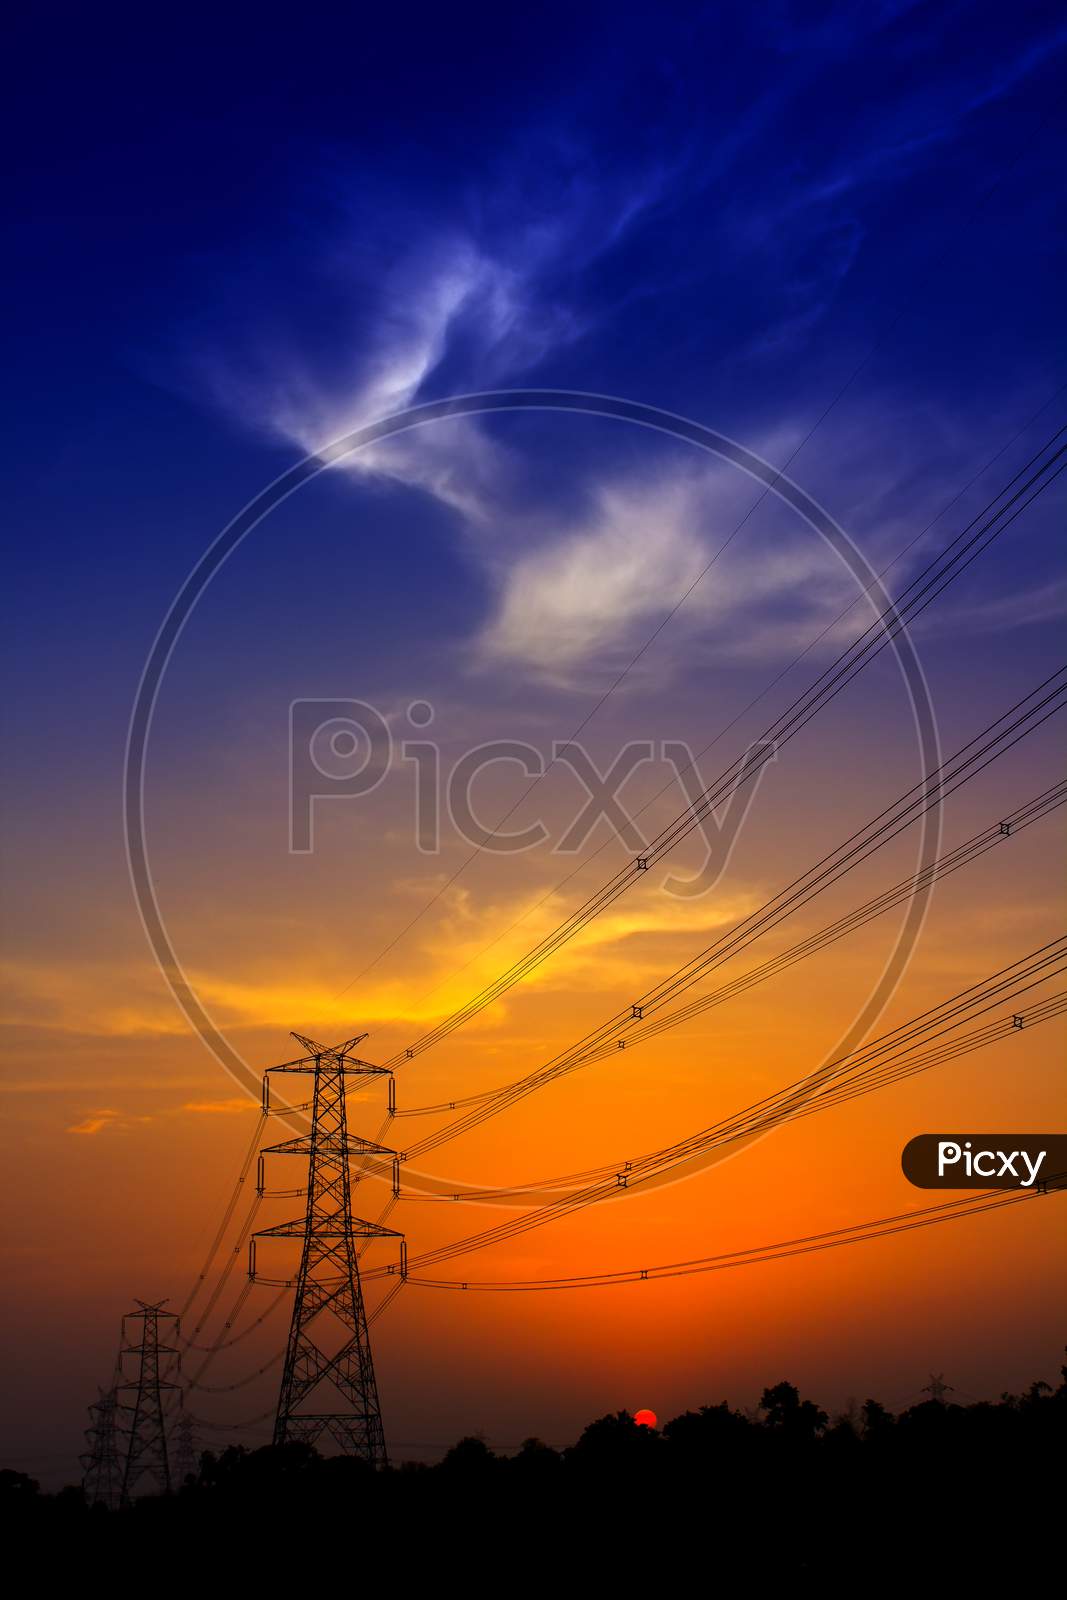 An Electric tower with Clouds in the Background